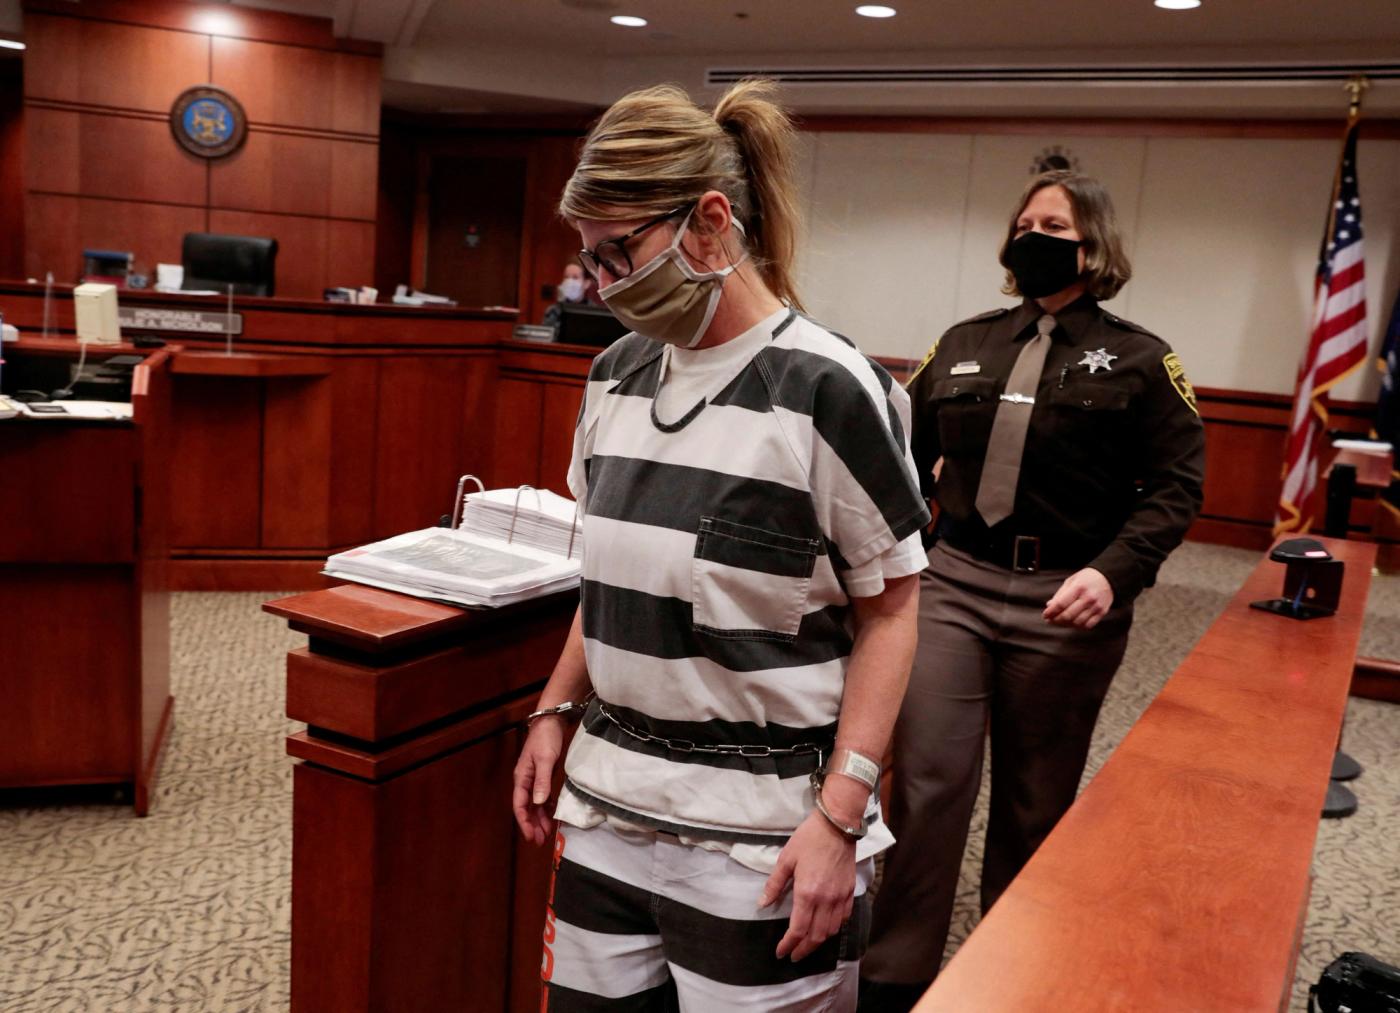 Jennifer Crumbley, the parent of accused Oxford High School gunman Ethan Crumbley, is escorted into the courtroom by an Oakland County Sheriff during a court procedural hearing in Rochester Hills, Michigan, U.S., February 24, 2022. REUTERS/Rebecca Cook/File Photo